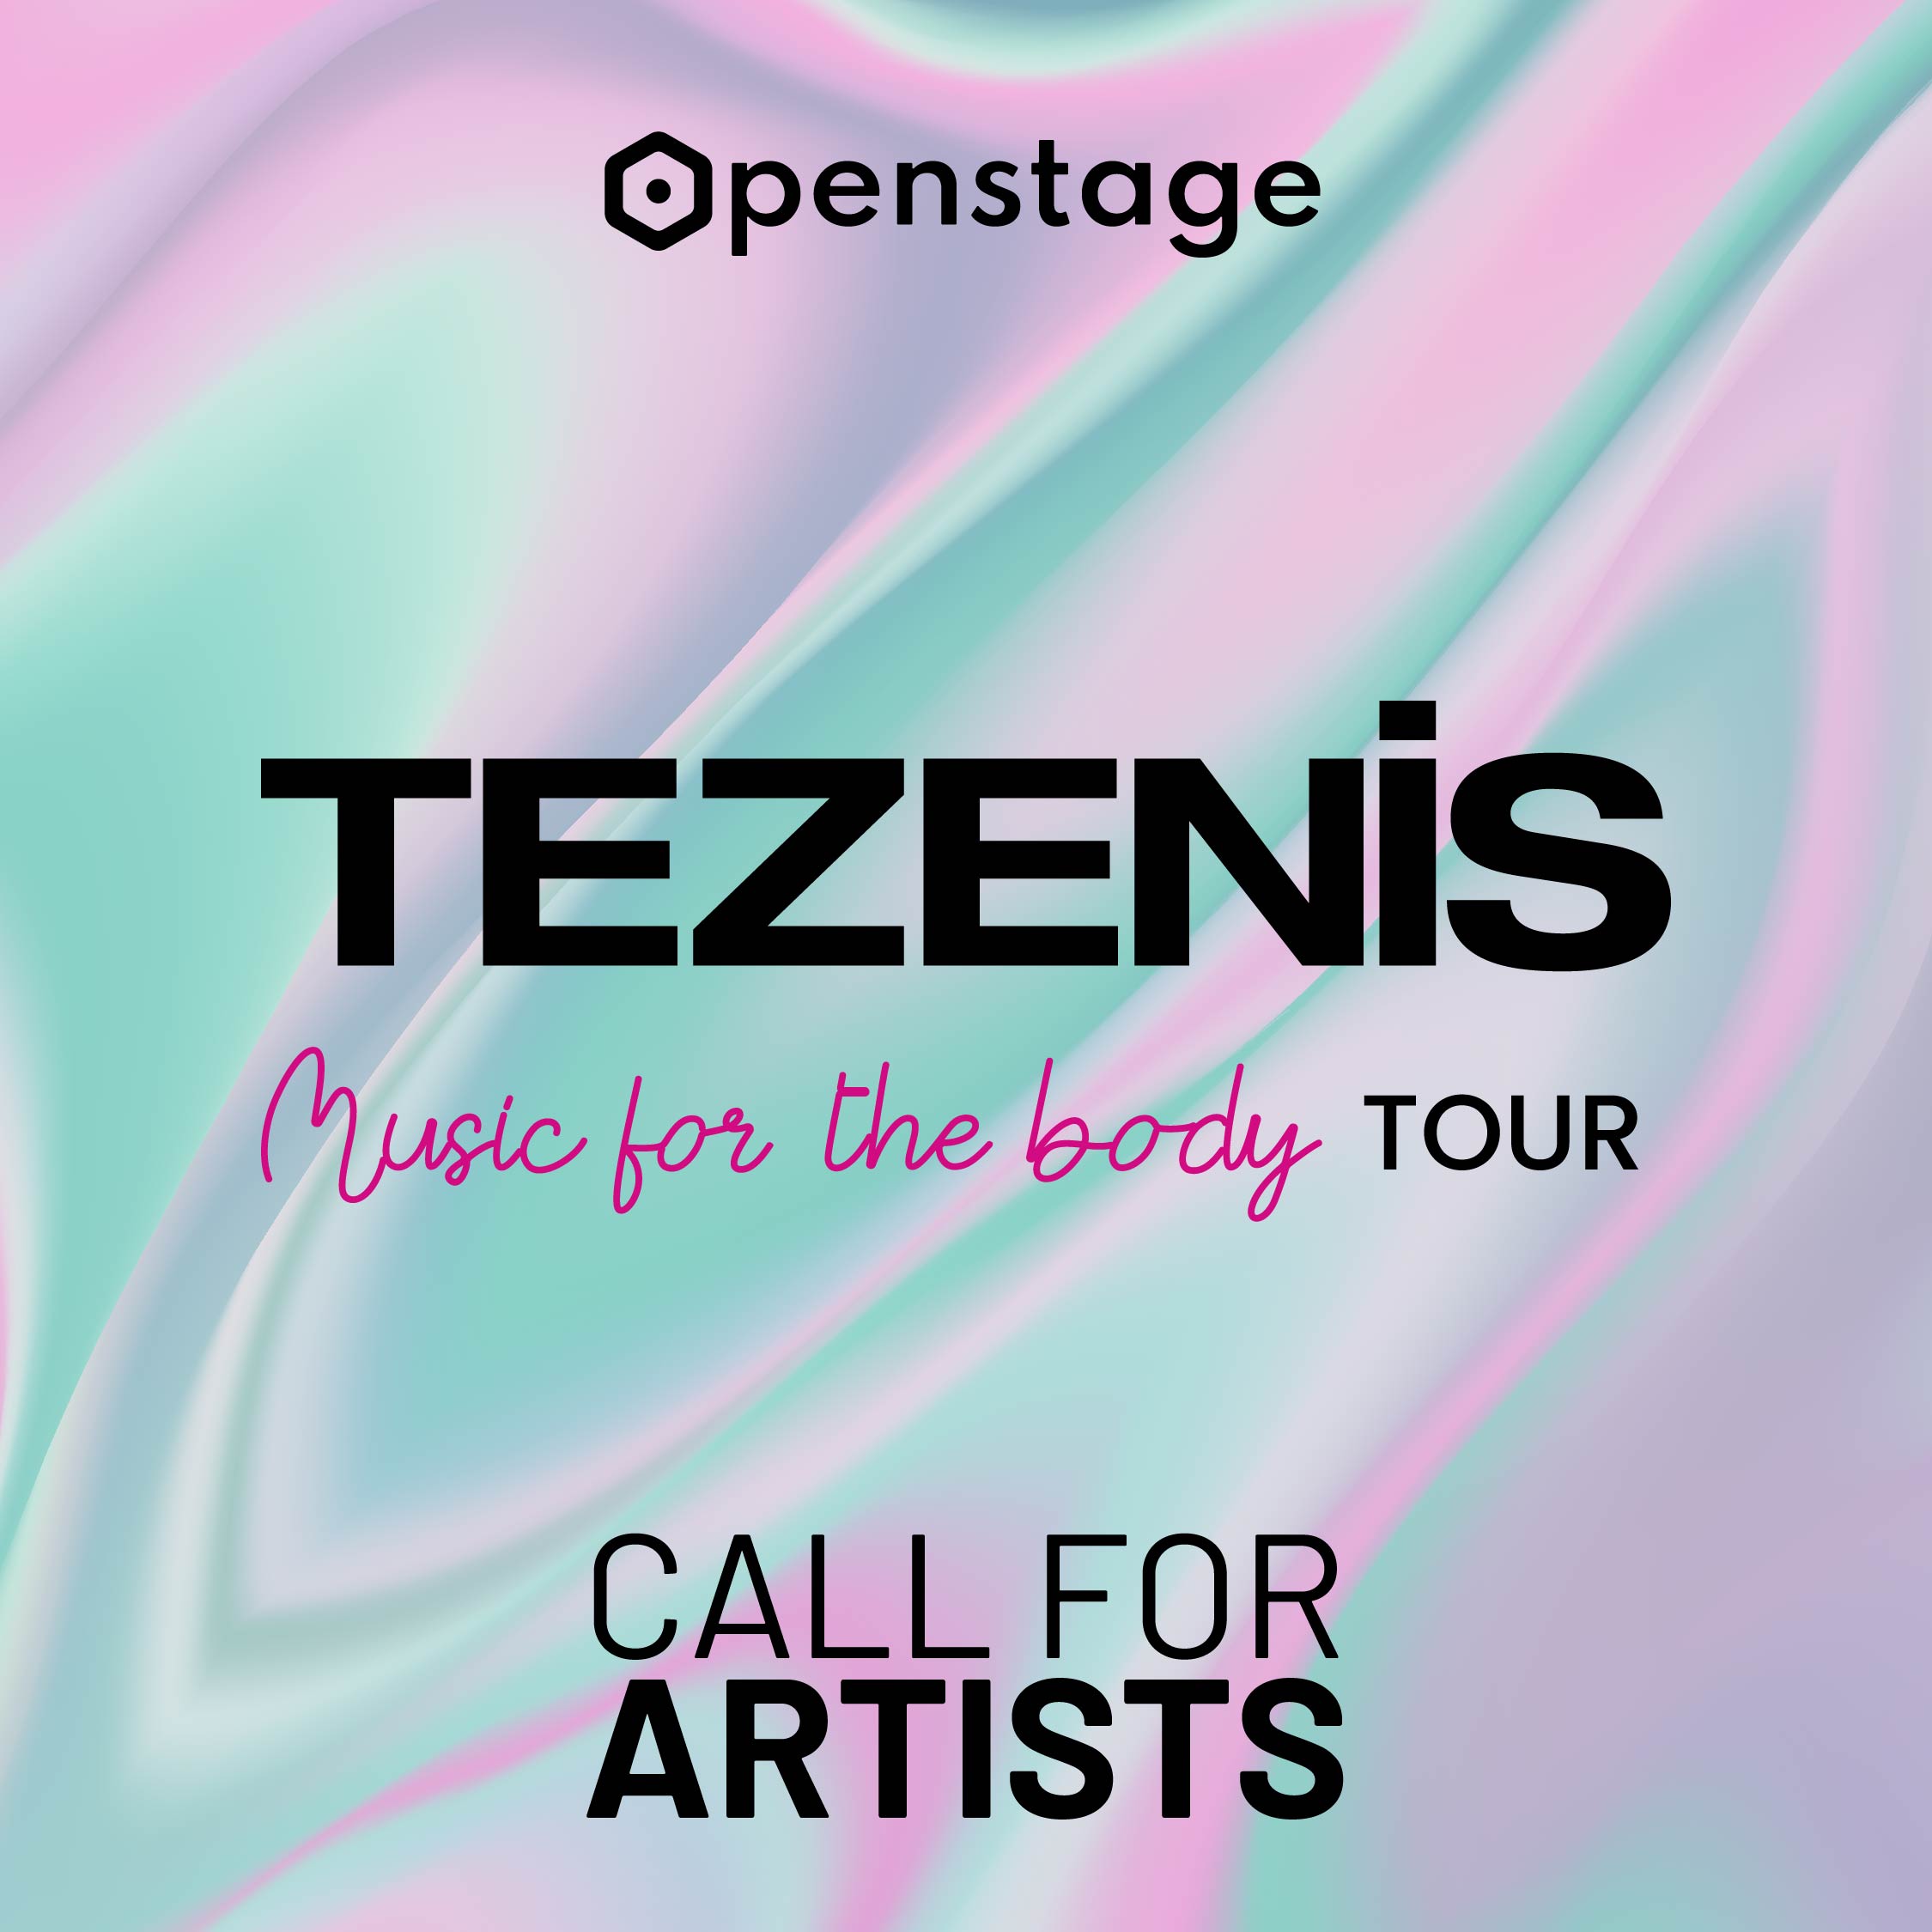 Tezenis music for the body tour - call for artists - Openstage